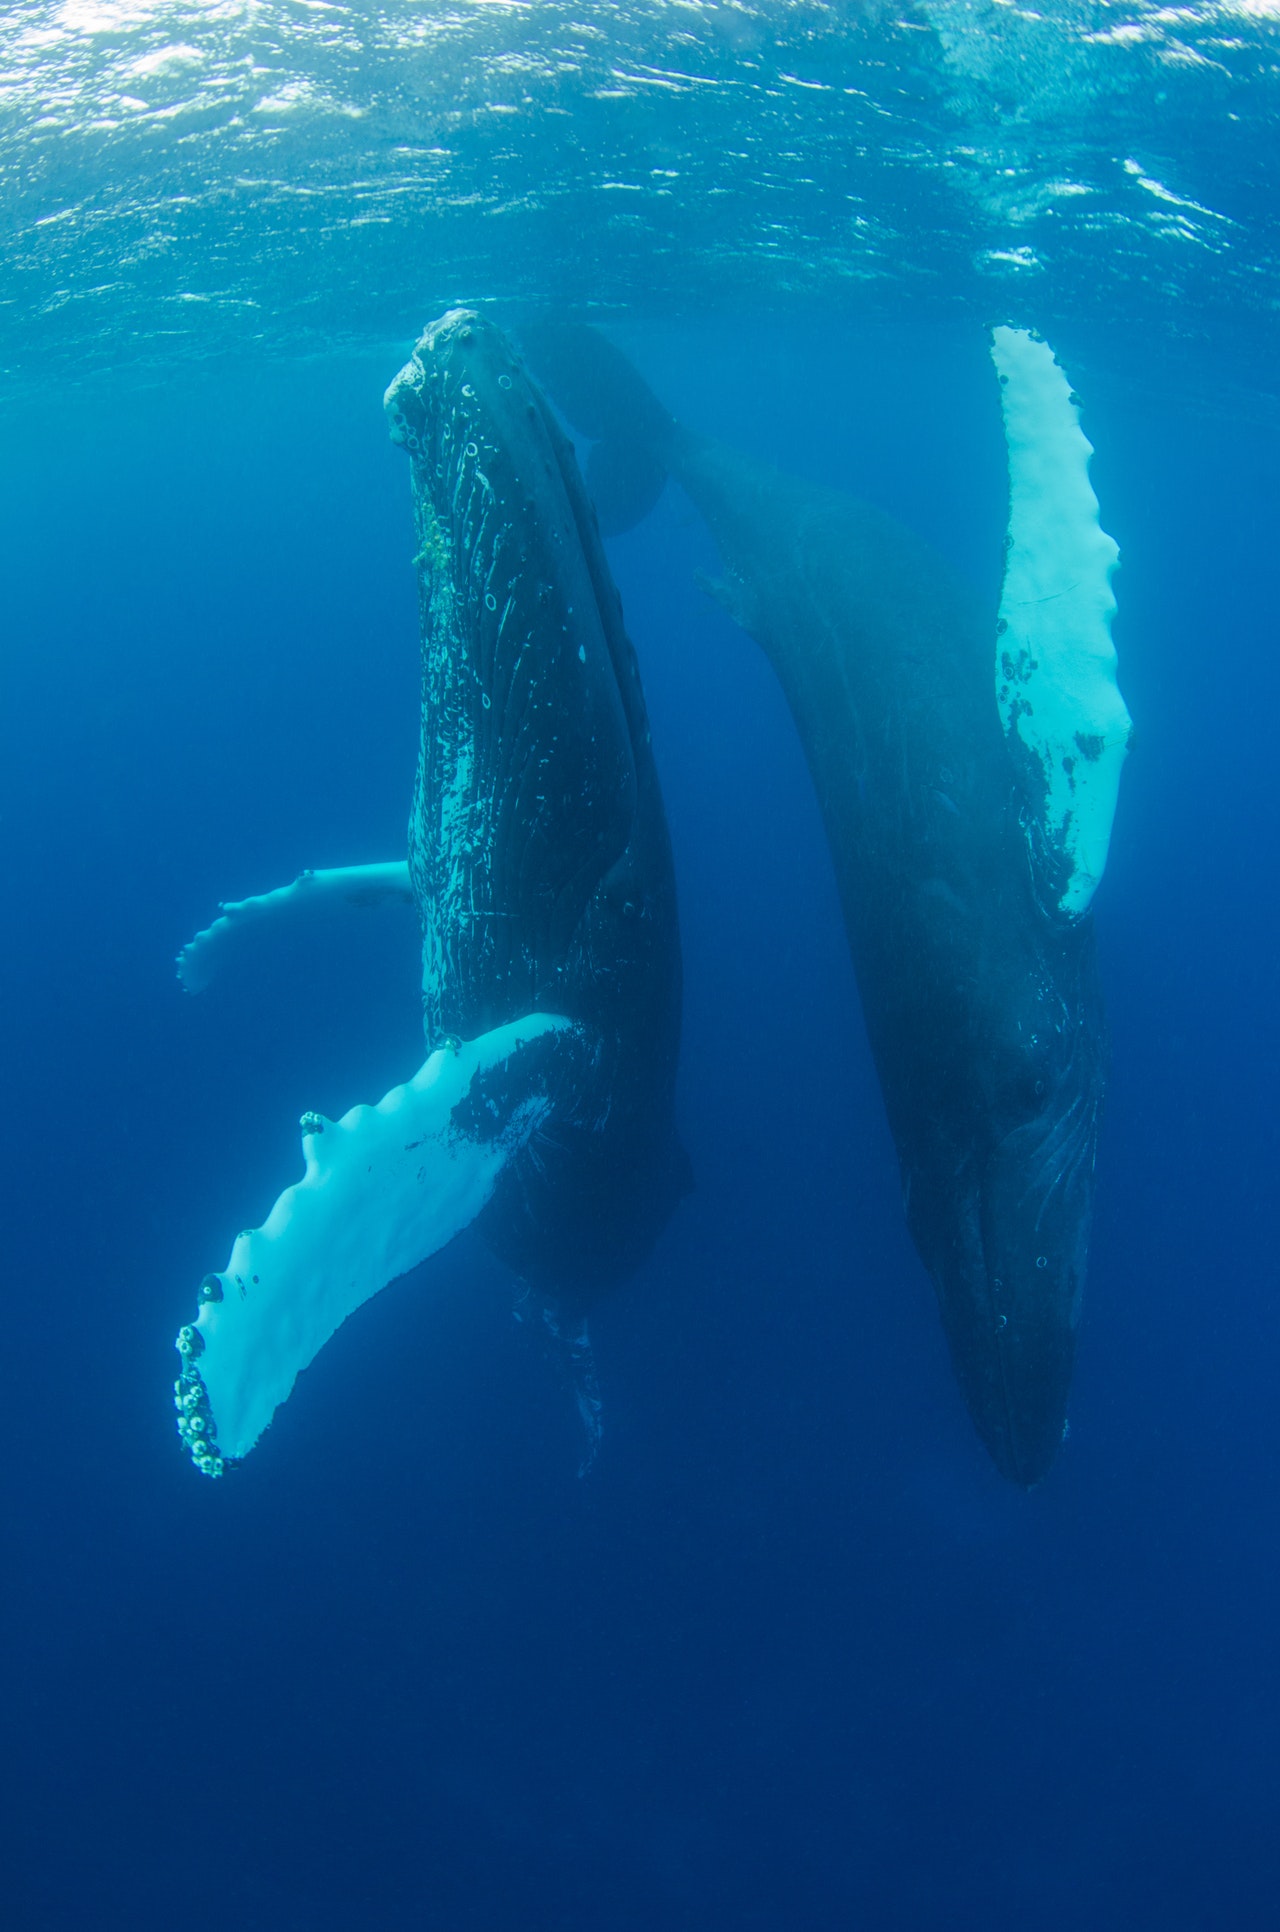 Antarctica is a popular feeding ground for this species but global warming could affect krill populations in this area, which could subsequently contribute to a decline in humpback numbers.